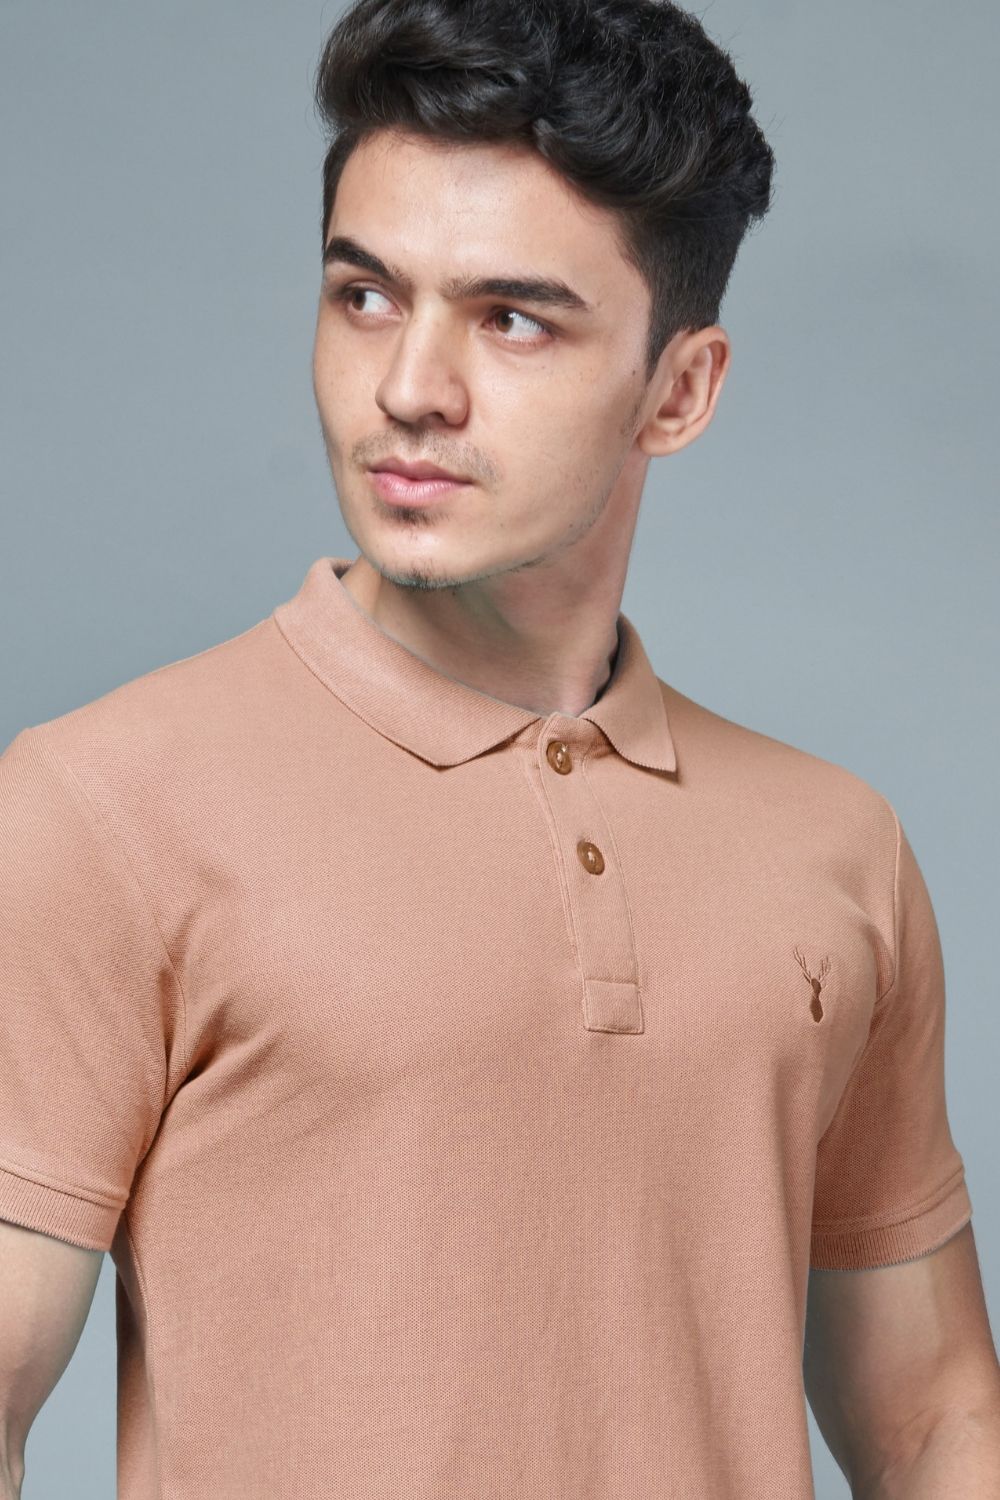 Bisque colored, identity Polo T-shirts for men with collar and half sleeves, front view.